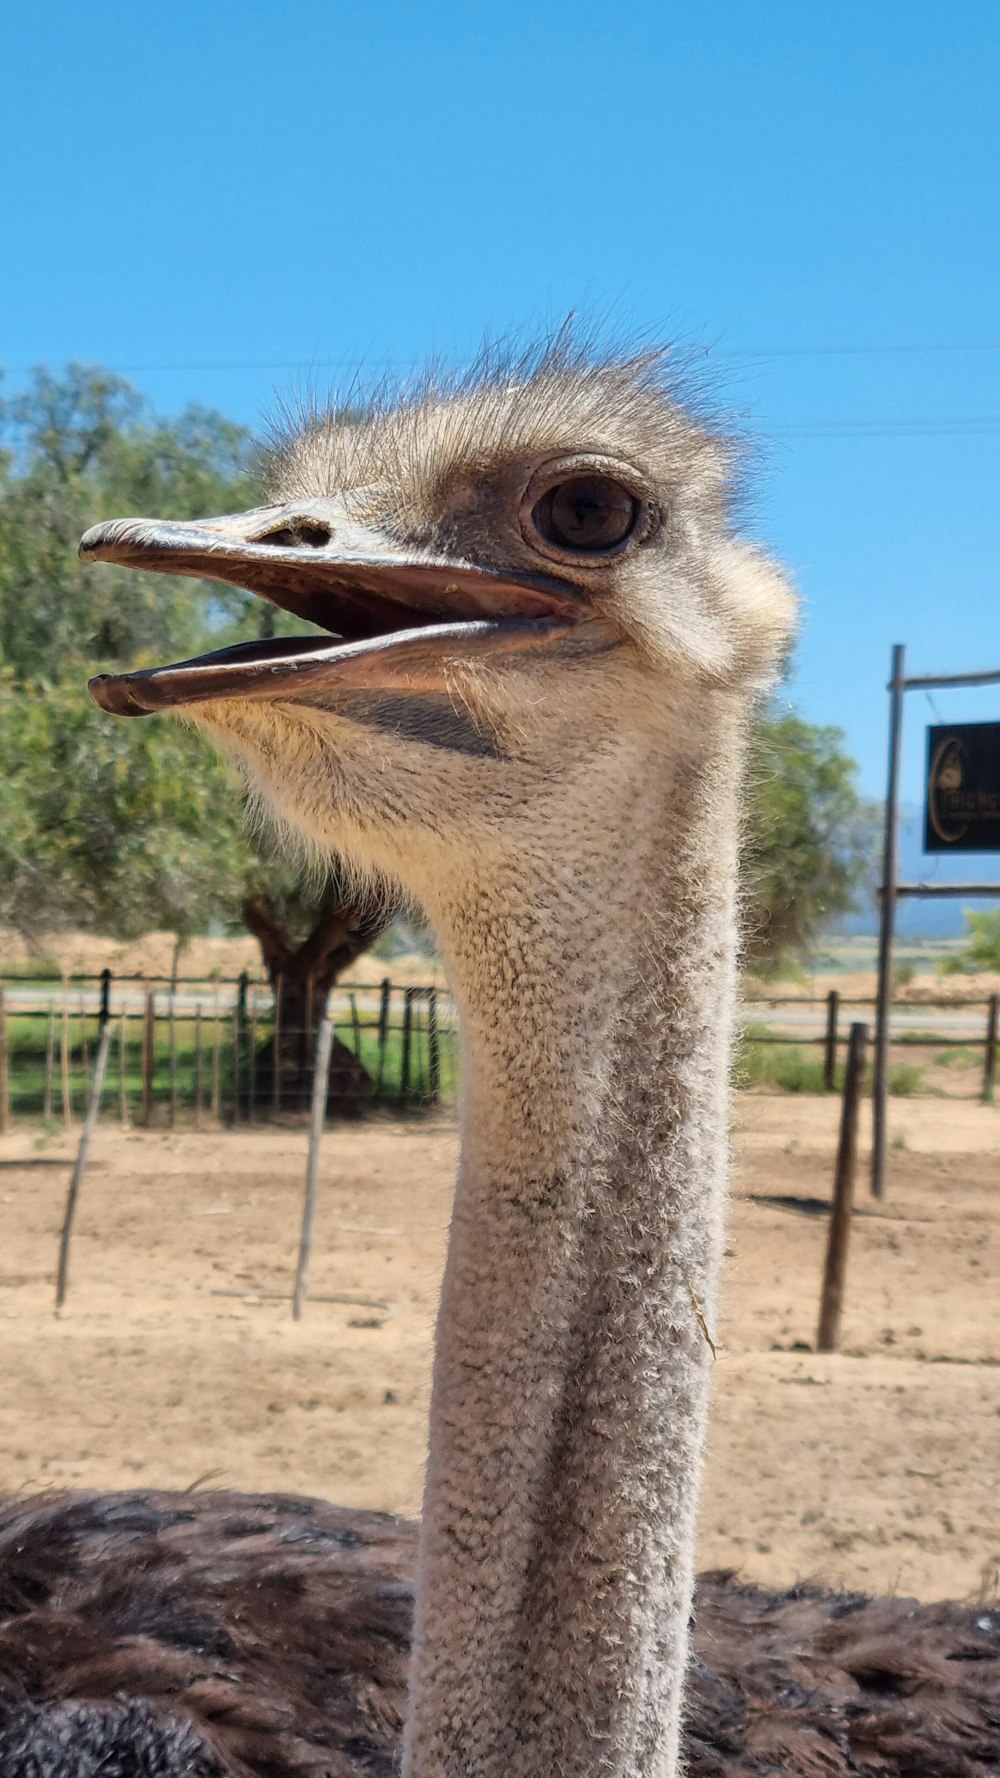 an ostrich with its mouth open in an enclosure